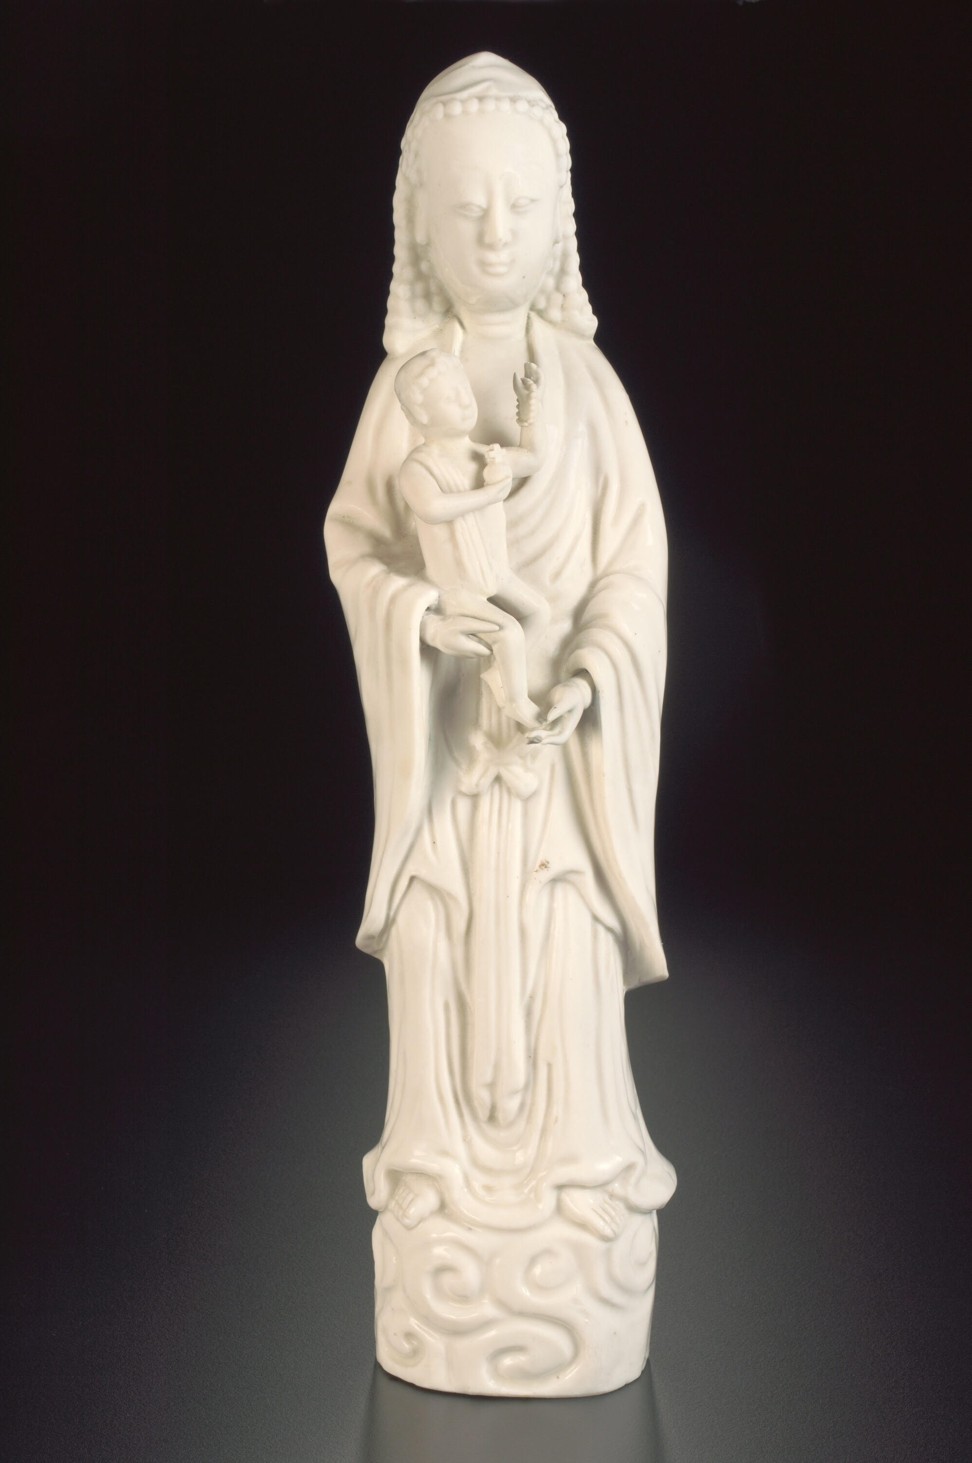 A virgin and child in porcelain with ivory glaze produced in China during the Kangxi period of the Qing dynasty (1662-1722). Photo: Courtesy of the Asian Civilisations Museum, National Heritage Board, Singapore.